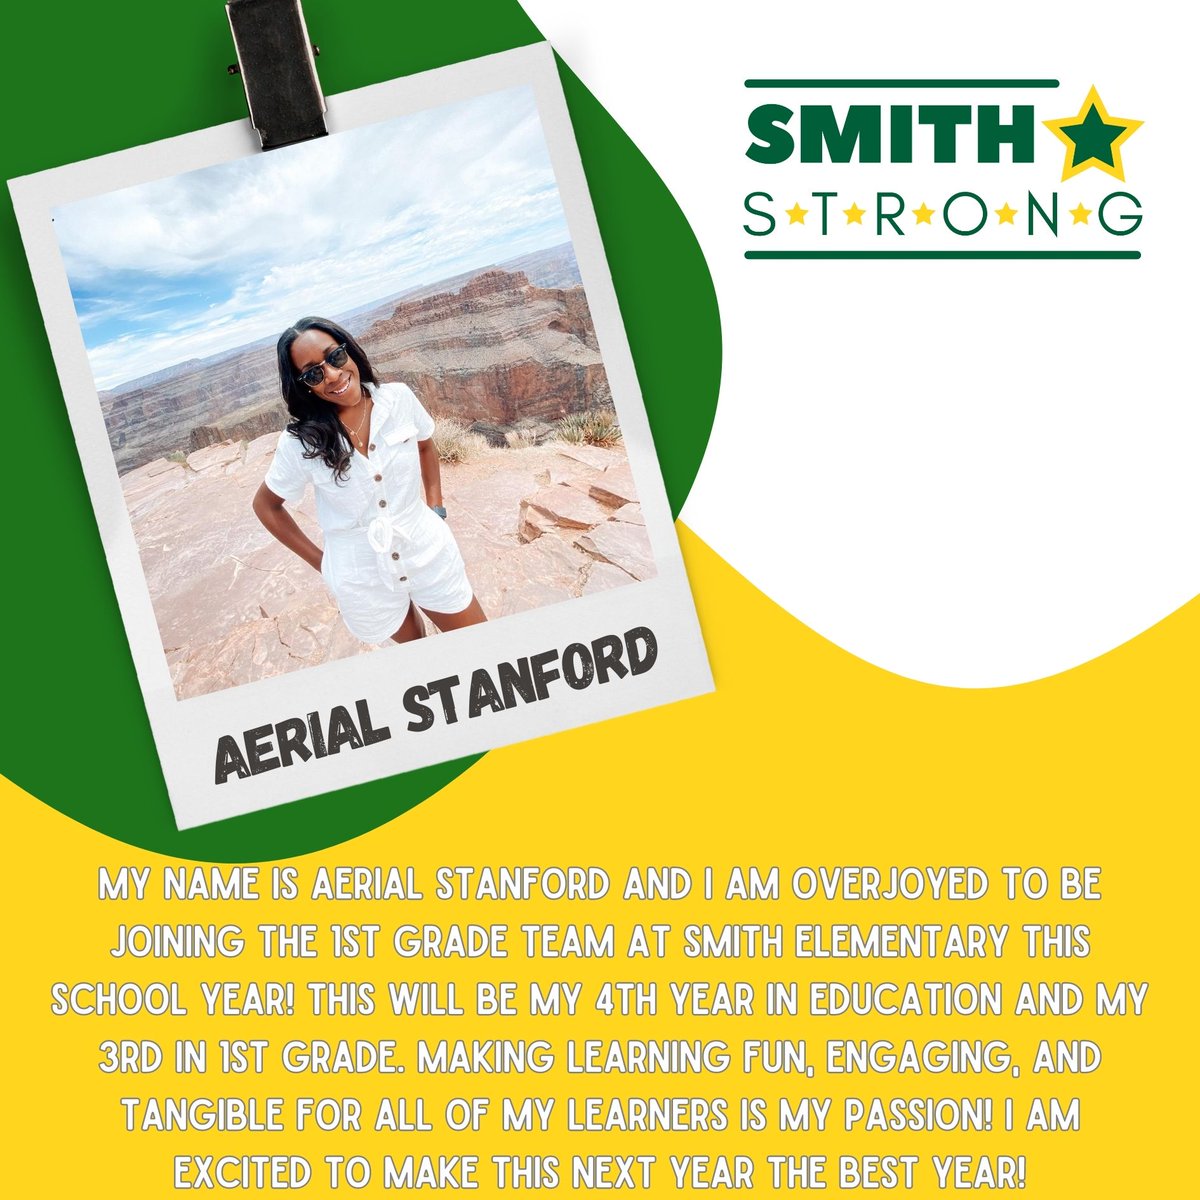 #SMITHSTRONG💪, help us welcome Aerial Stanford to Smith Elementary! She will be joining our 1st-grade team here at Smith Elementary!⭐️💚💪